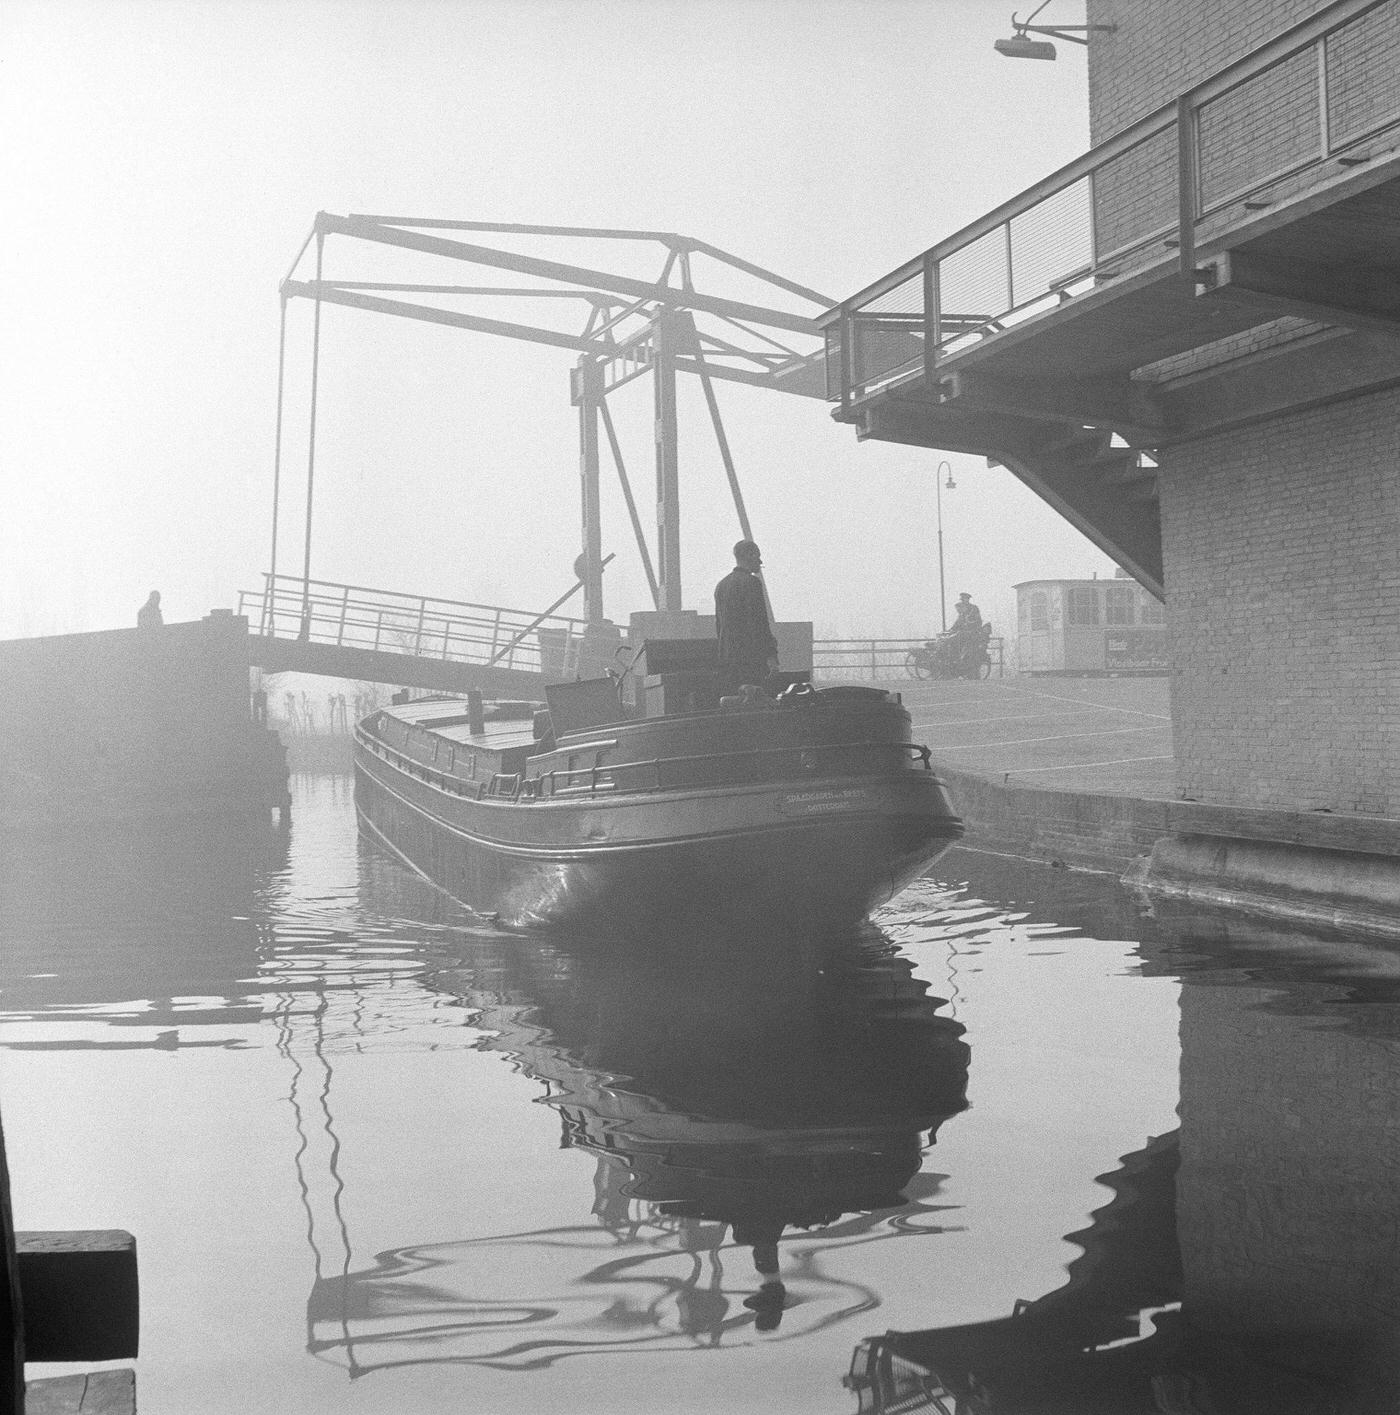 A boat passing under a drawbridge in the Netherlands, 1954.